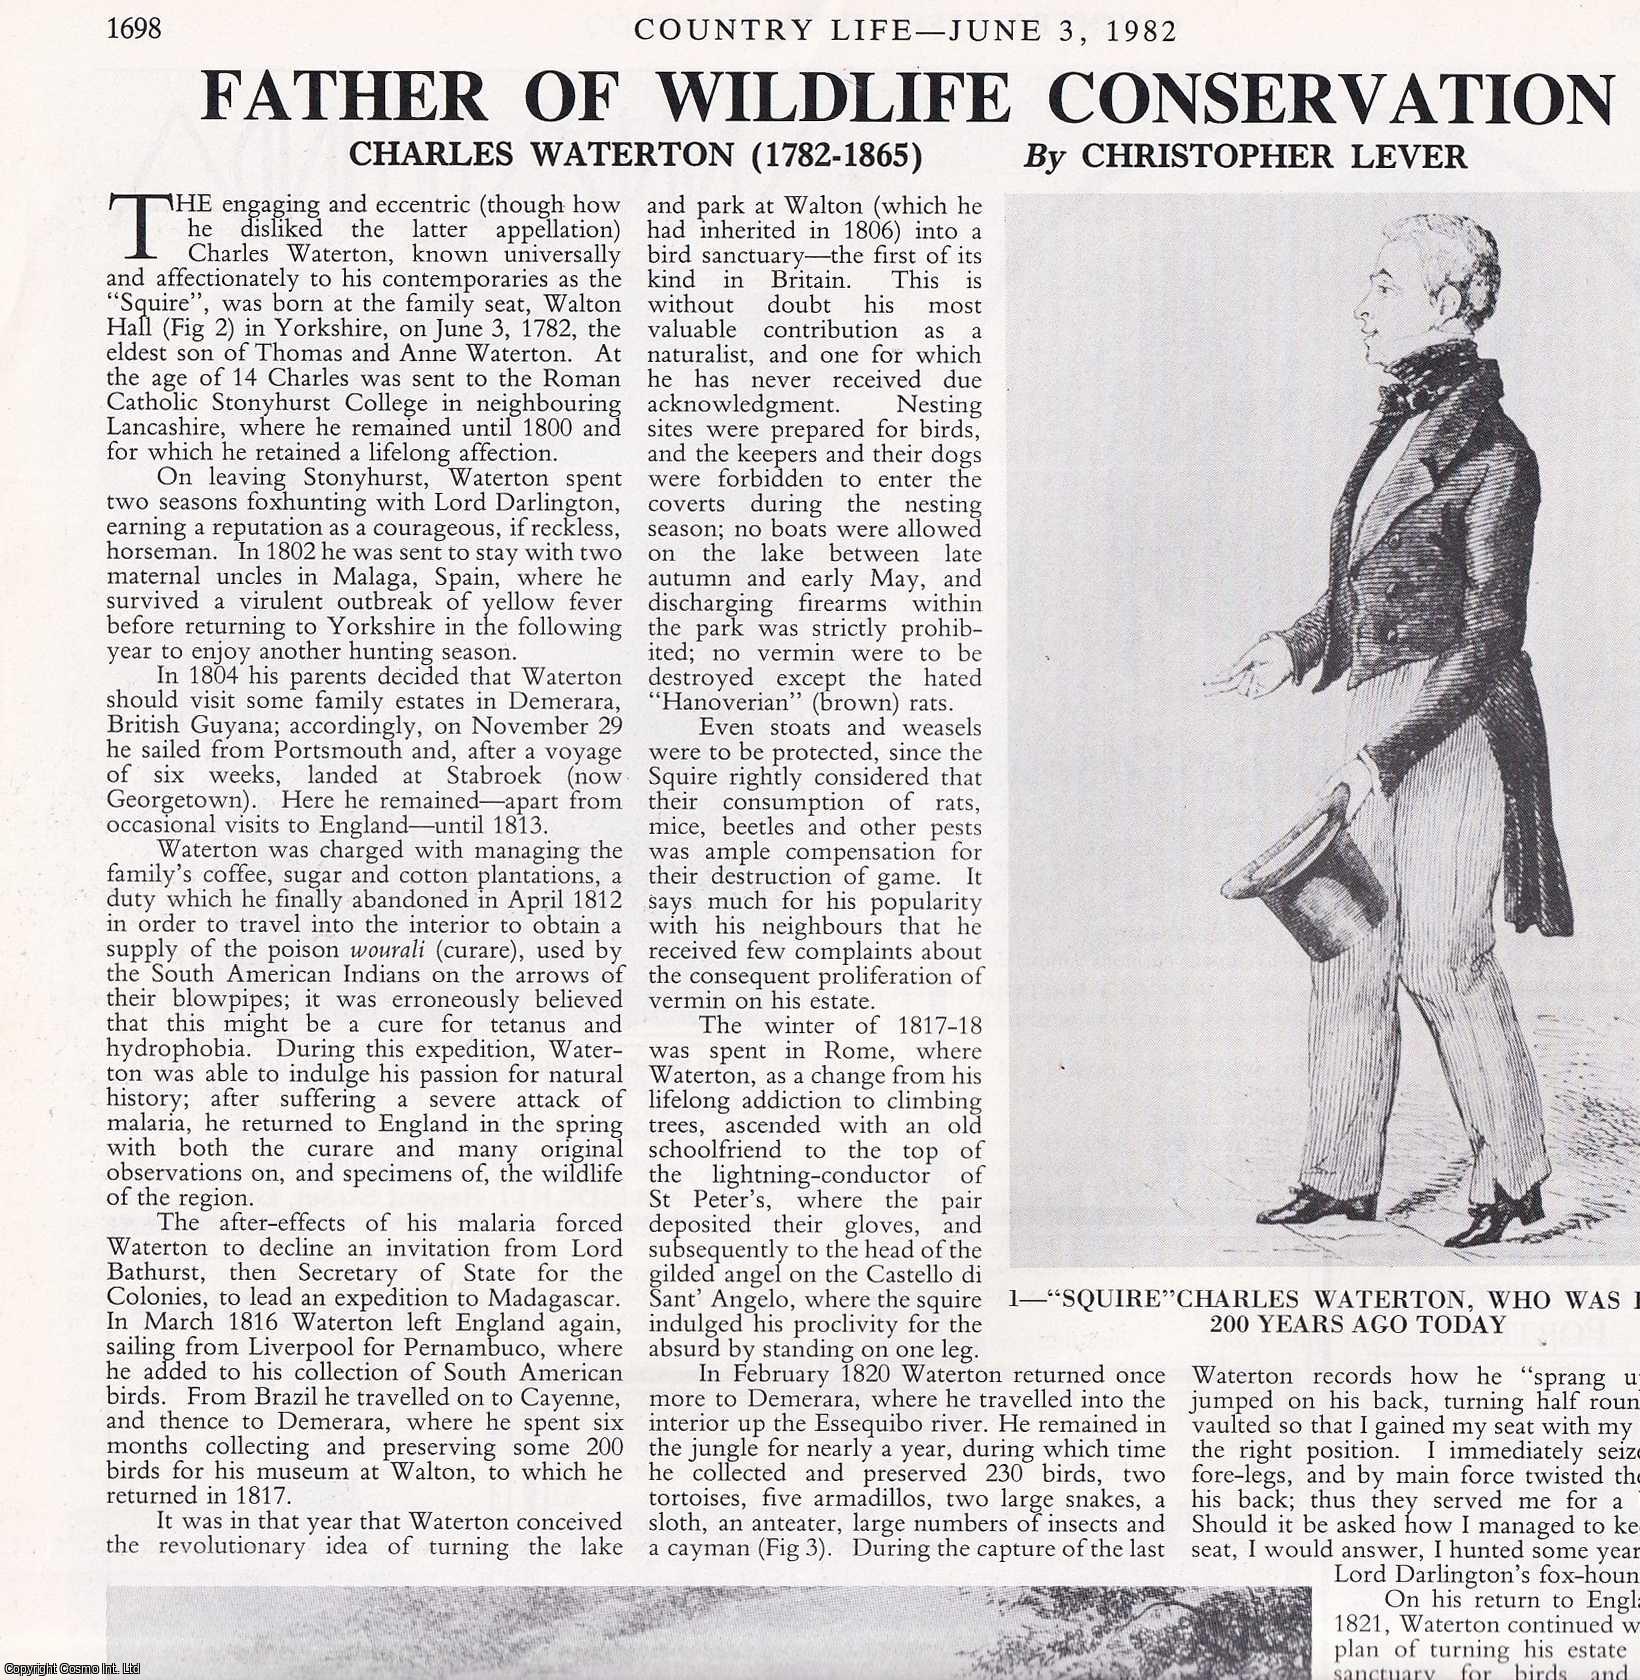 Christopher Lever - Charles Waterton (1782-1865); Father of Wildlife Conservation. Several pictures and accompanying text, removed from an original issue of Country Life Magazine, 1982.